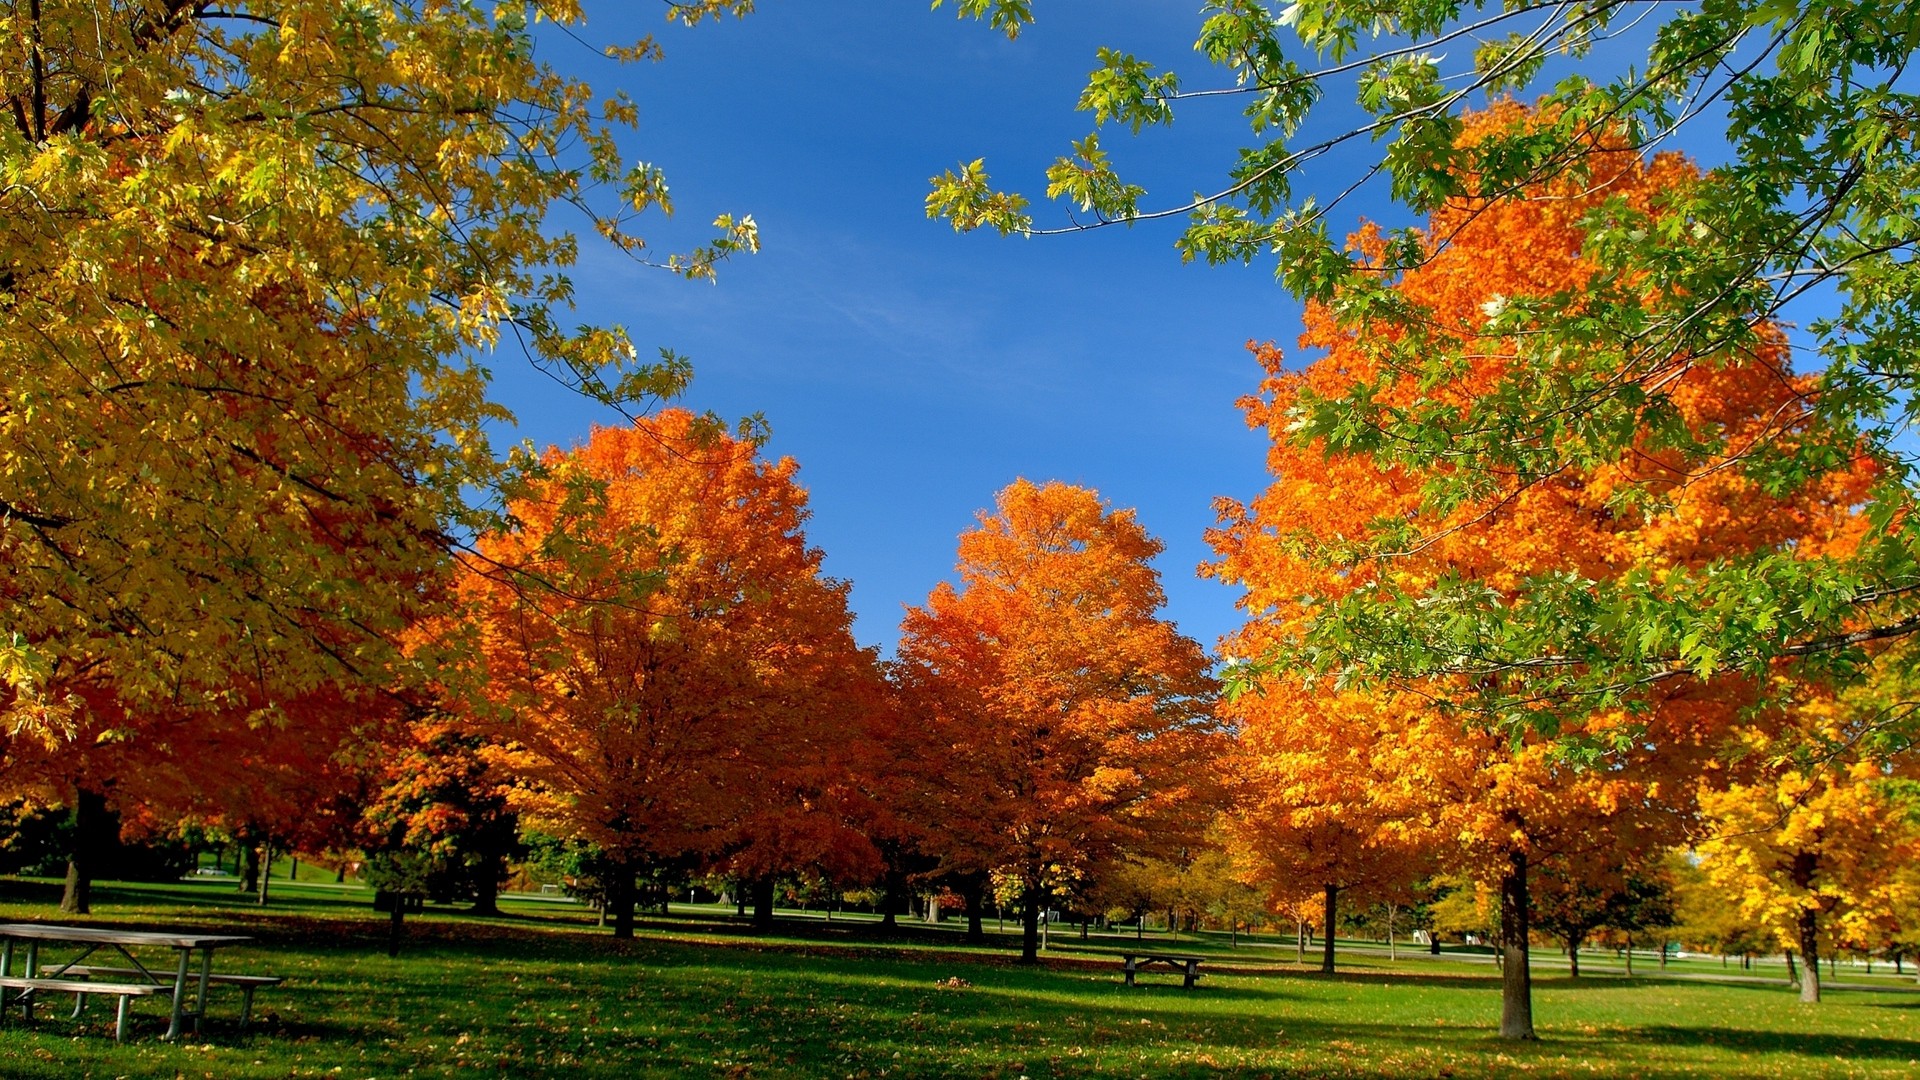 1920x1080 wallpapers: autumn, park, trees, leaves, picnic, amazing wallpaper (image)